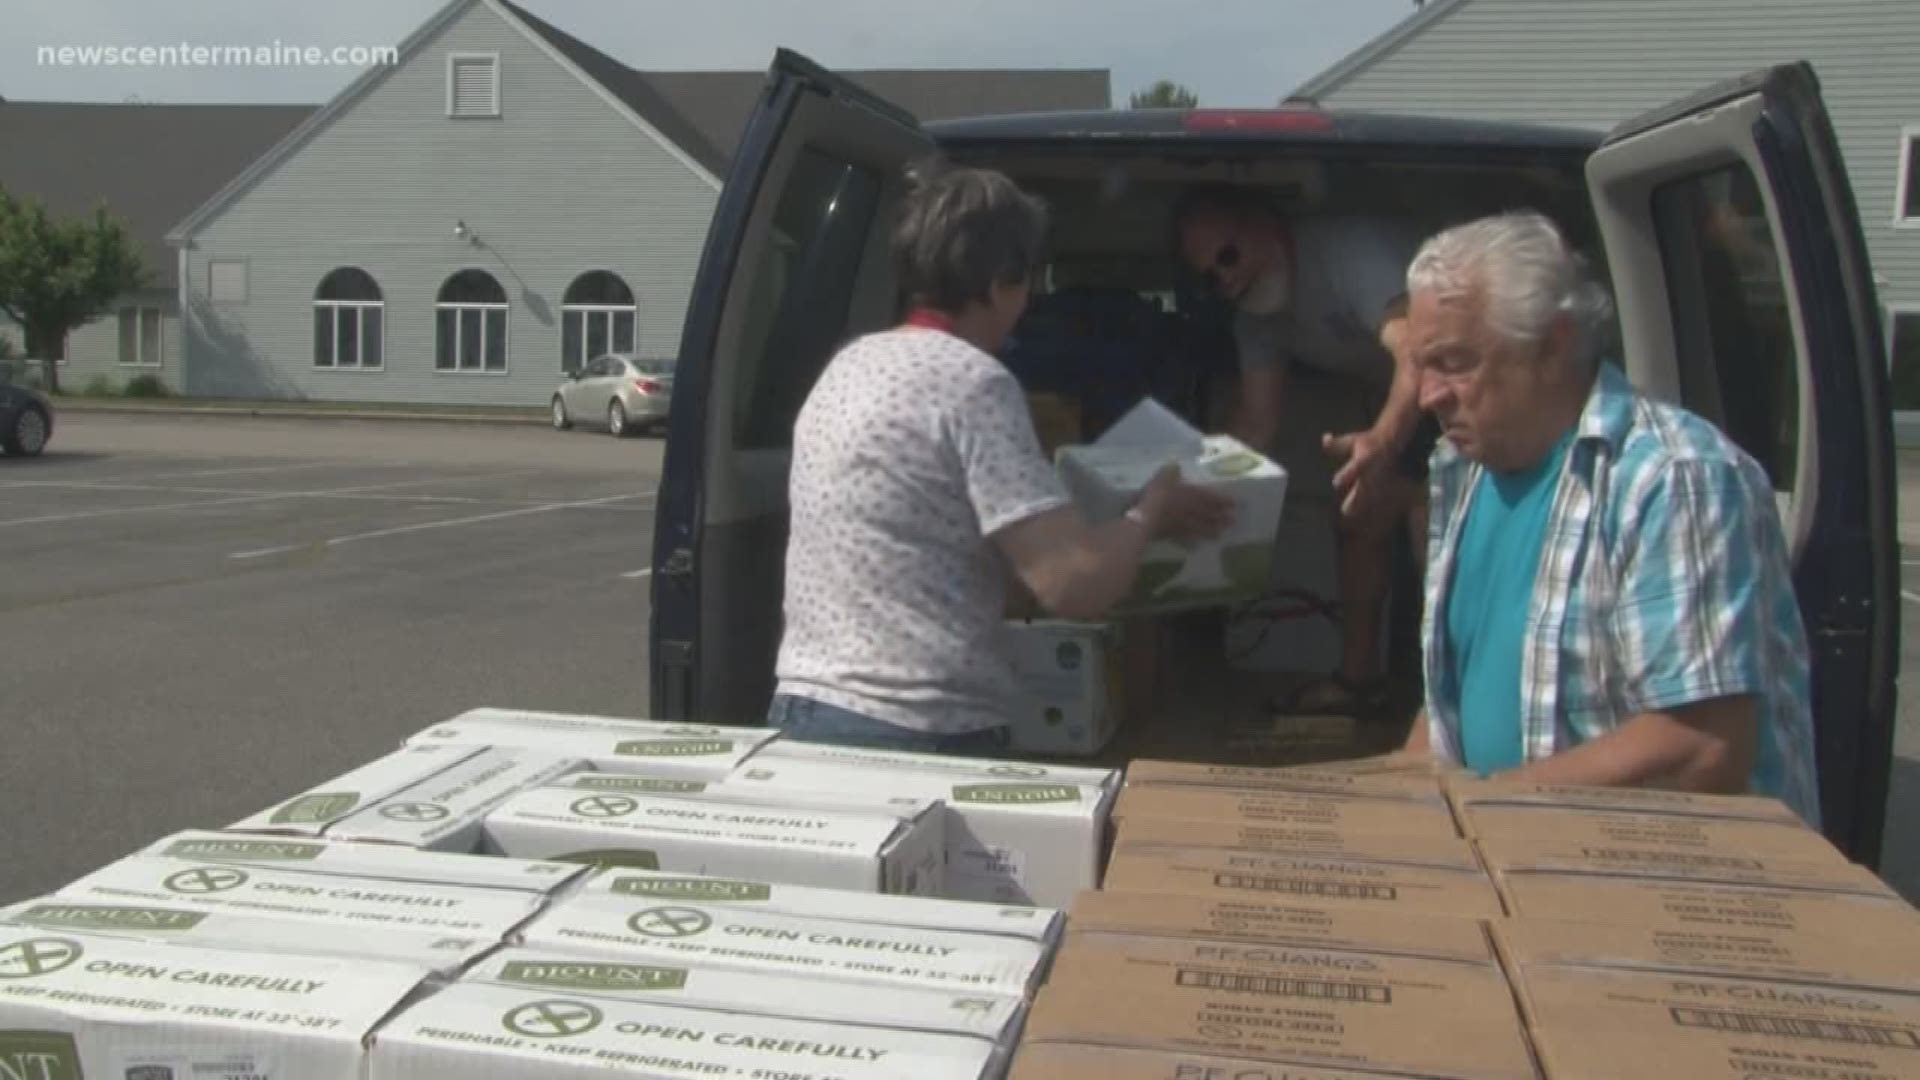 NEWS CENTER Maine, is planning to help more Mainers who are in need get access to healthy meals in 2019.